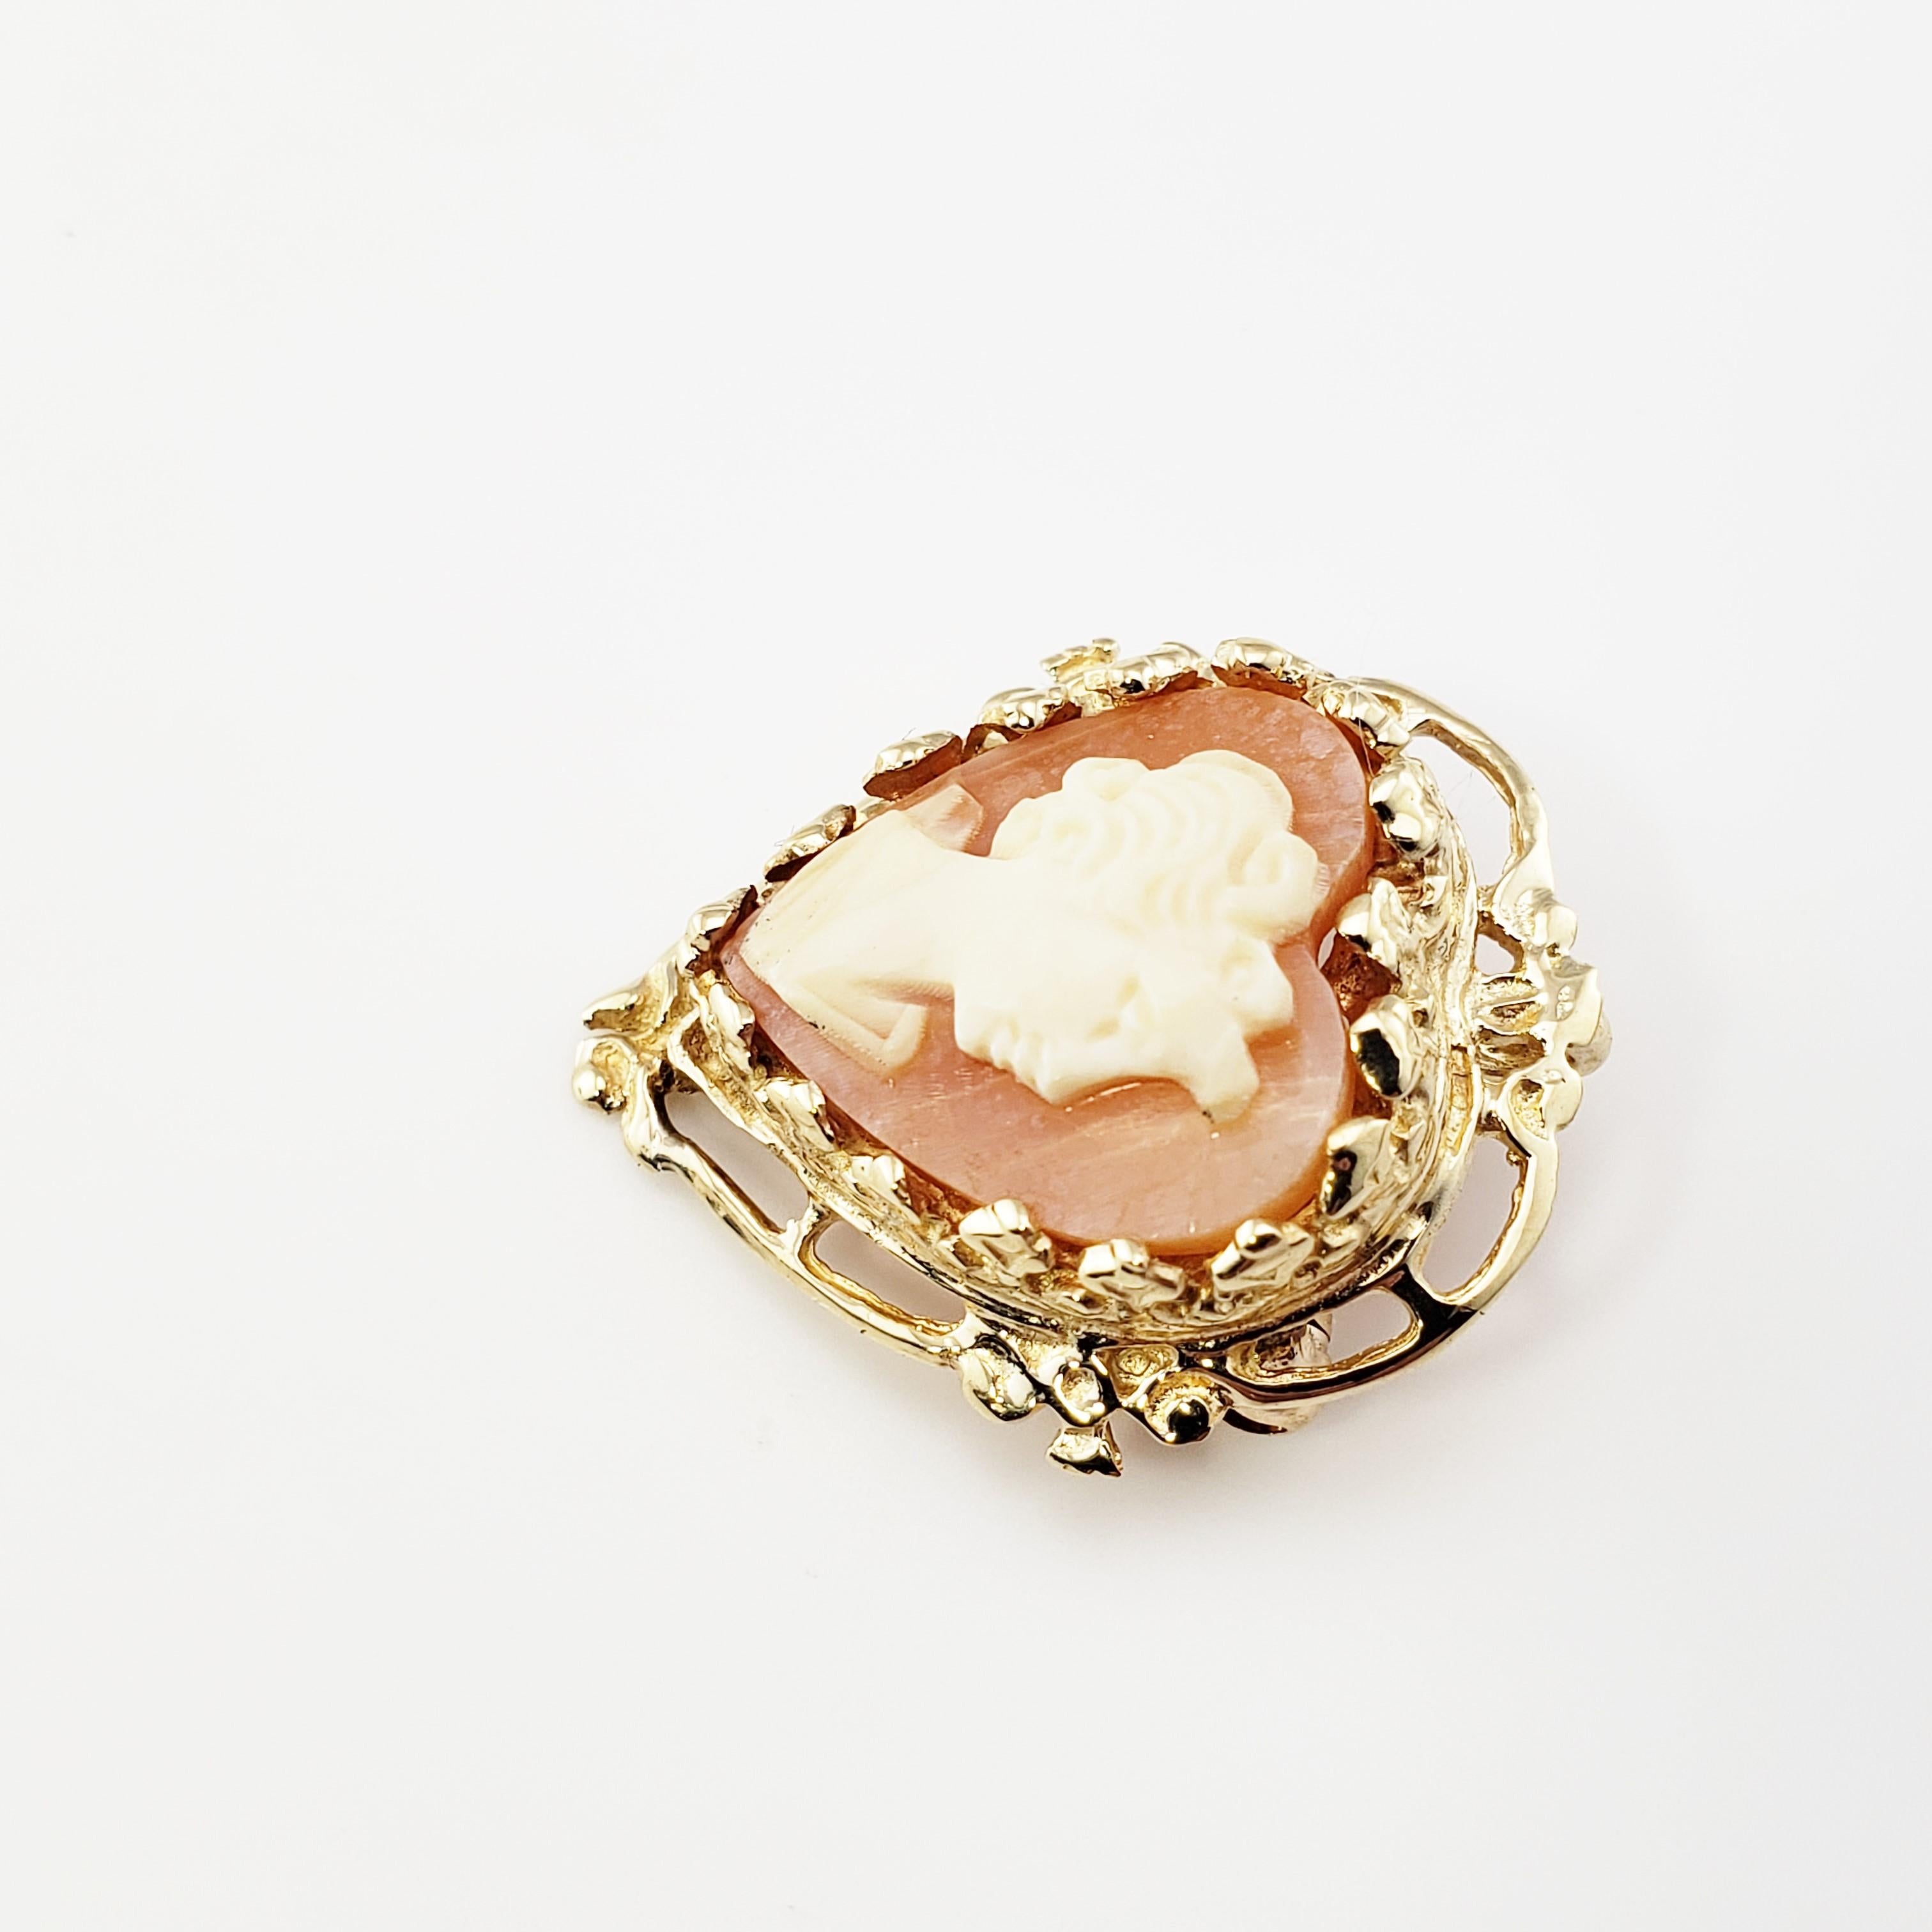 14 Karat Yellow Gold Heart Cameo Brooch/Pendant-

This lovely heart shaped cameo features a lovely lady in profile set in beautifully detailed 14K yellow gold.  Can be worn as pendant or a brooch.

Size: 23 mm x 20 mm 

Weight:  2.5 dwt. / 3.9